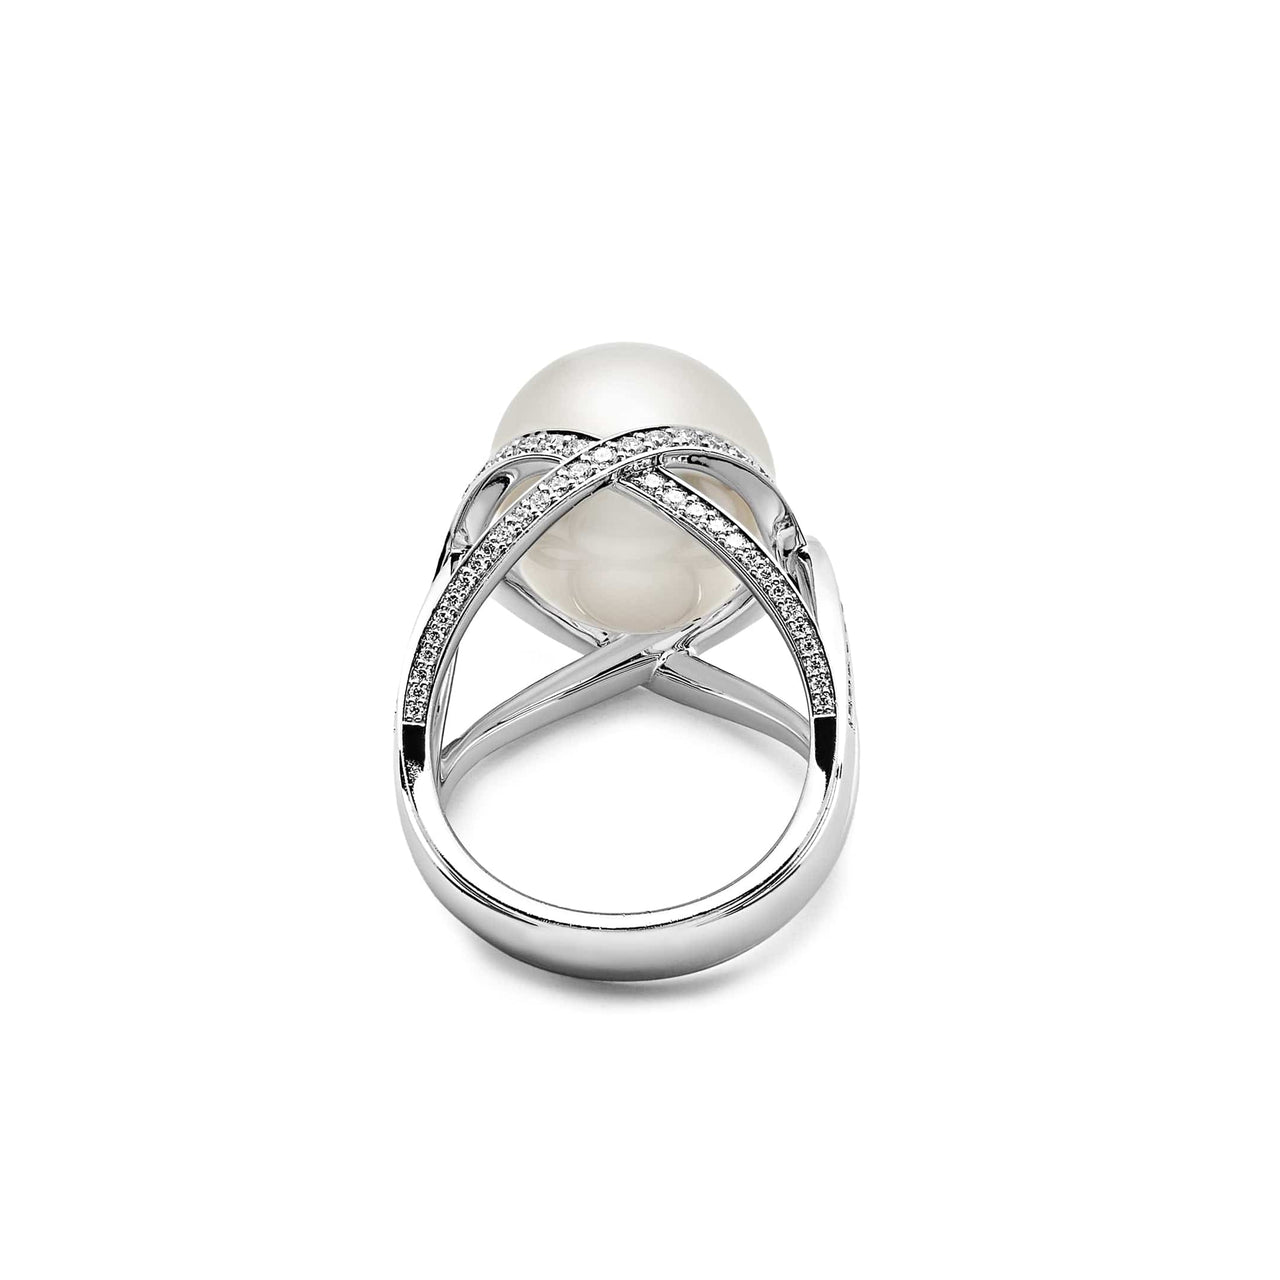 Mikimoto 'M Collection' White South Sea Cultured Pearl Ring